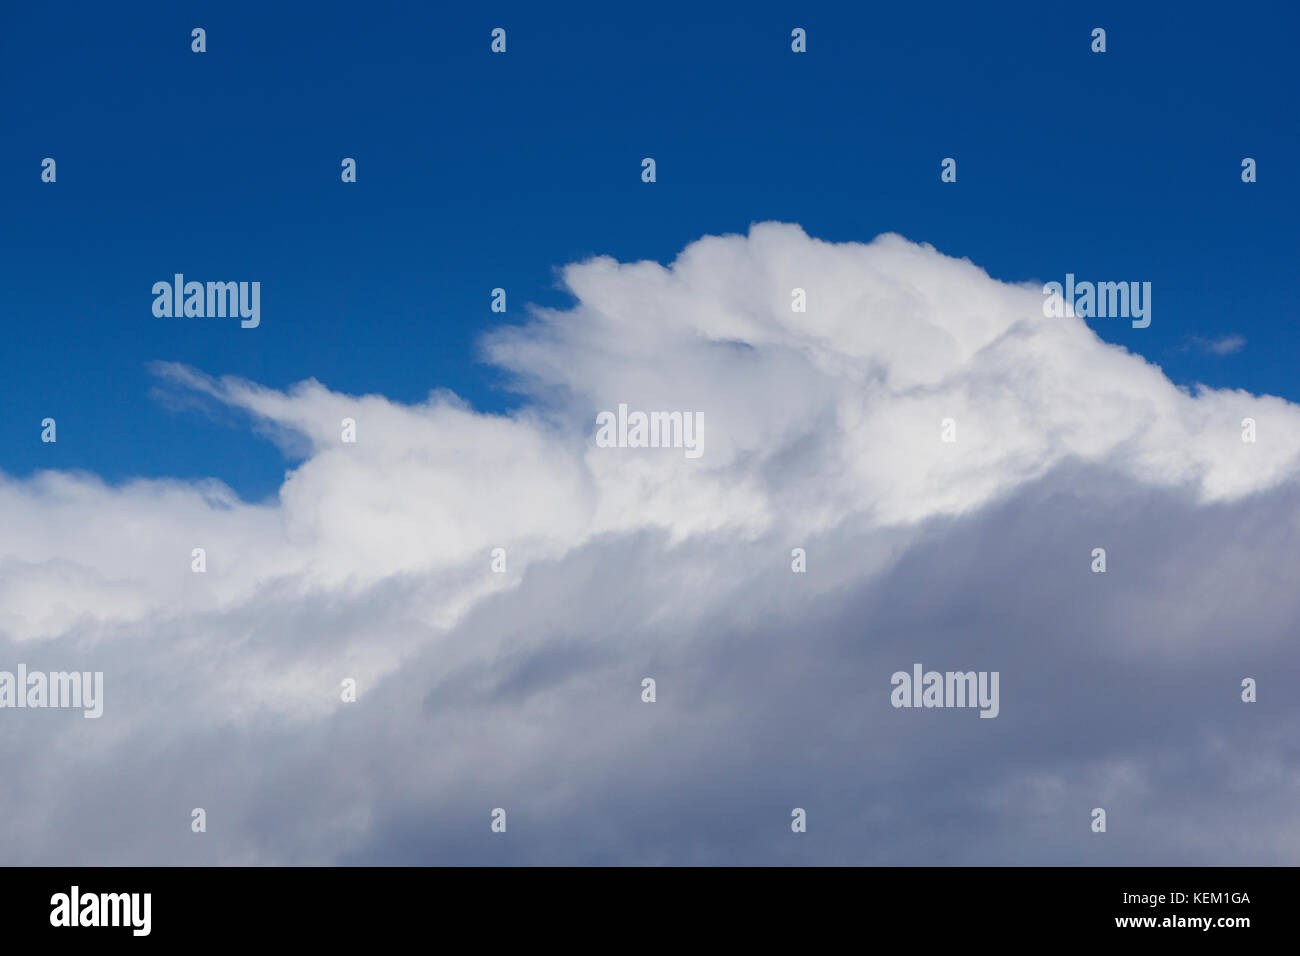 Blue sky and clouds Oct 22 2017 Stock Photo